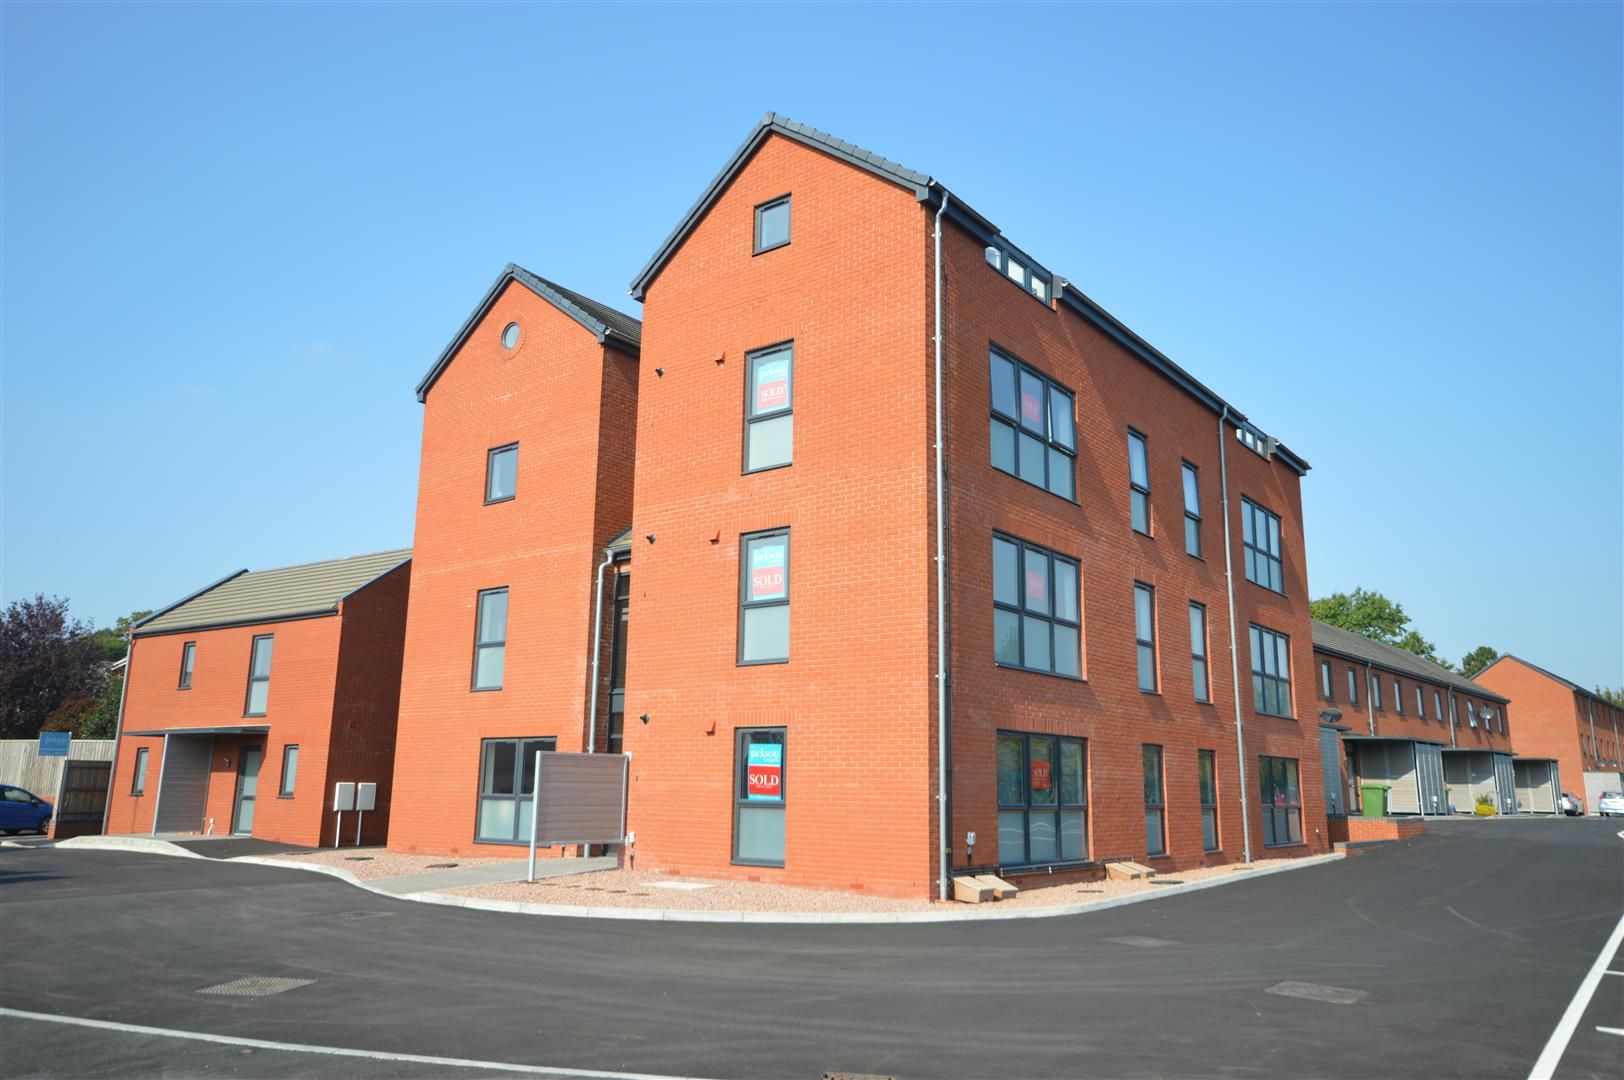 2 bed apartment for sale in Leominster 19